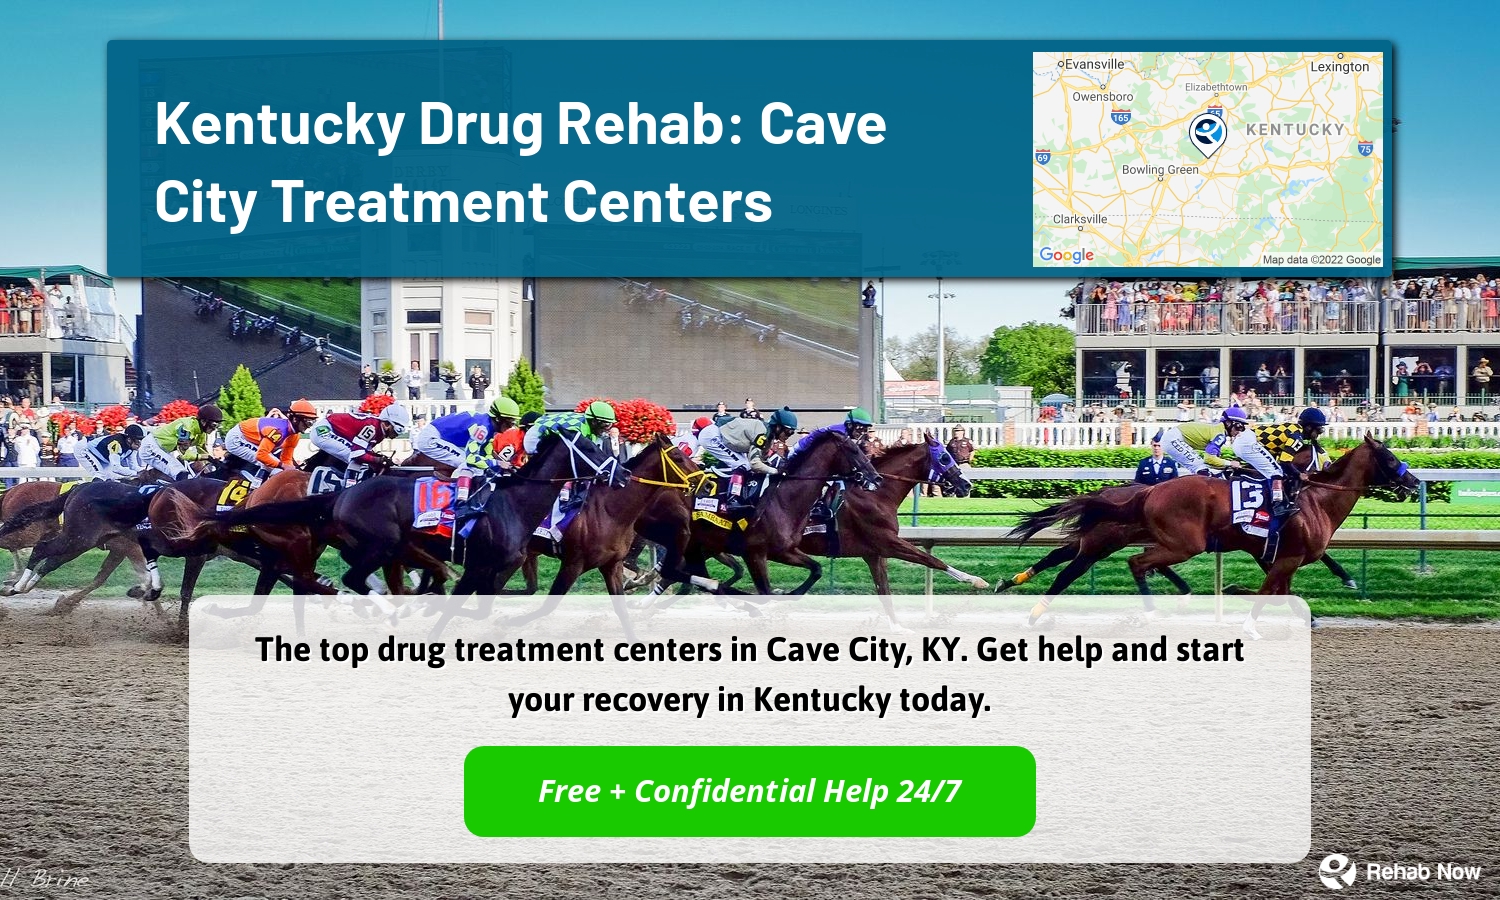 The top drug treatment centers in Cave City, KY. Get help and start your recovery in Kentucky today.